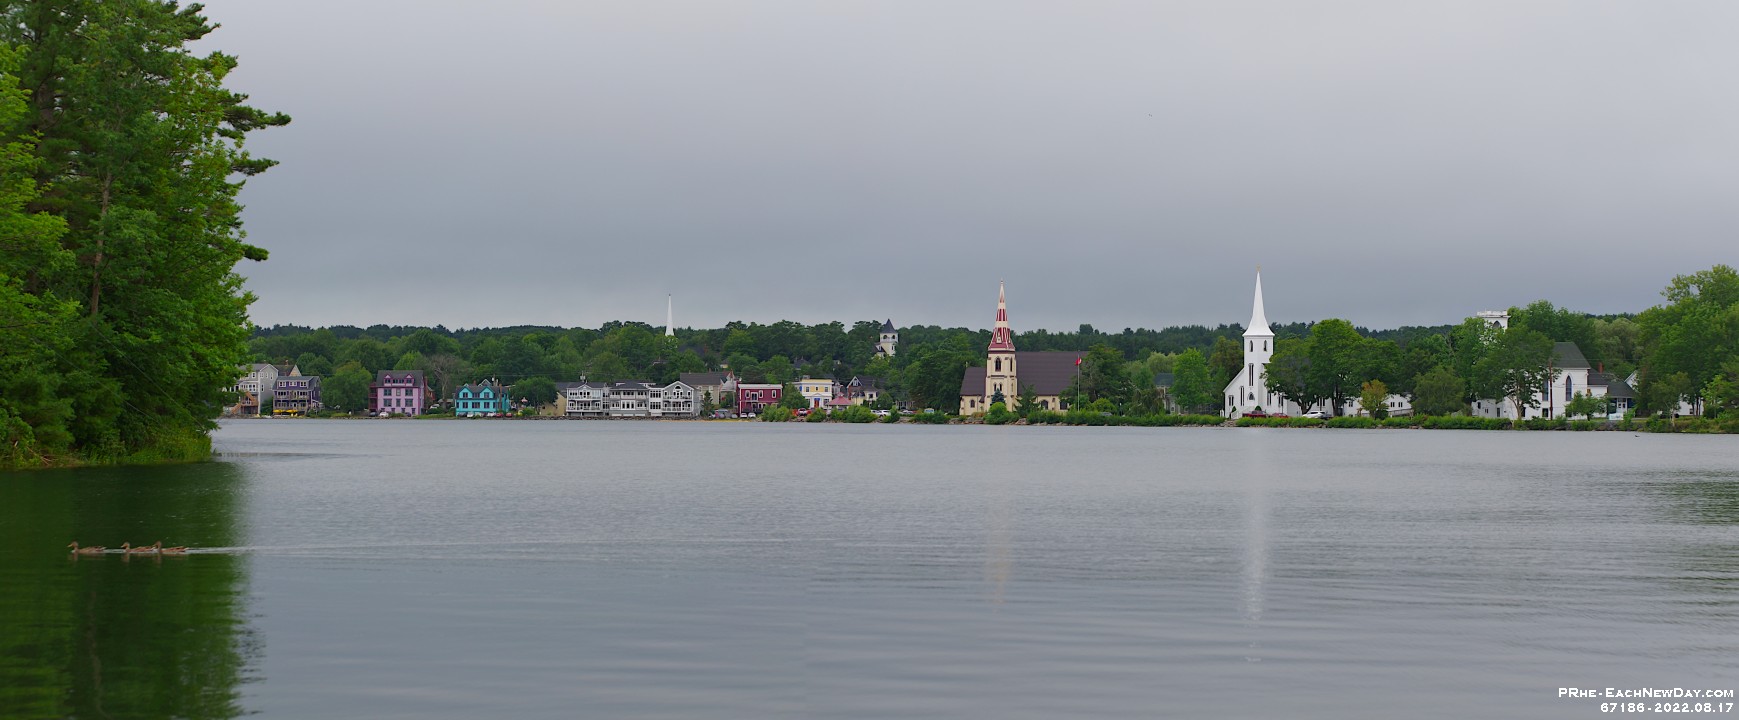 67186PaCrLe - A rainy afternoon stop, Mahone Bay, NS